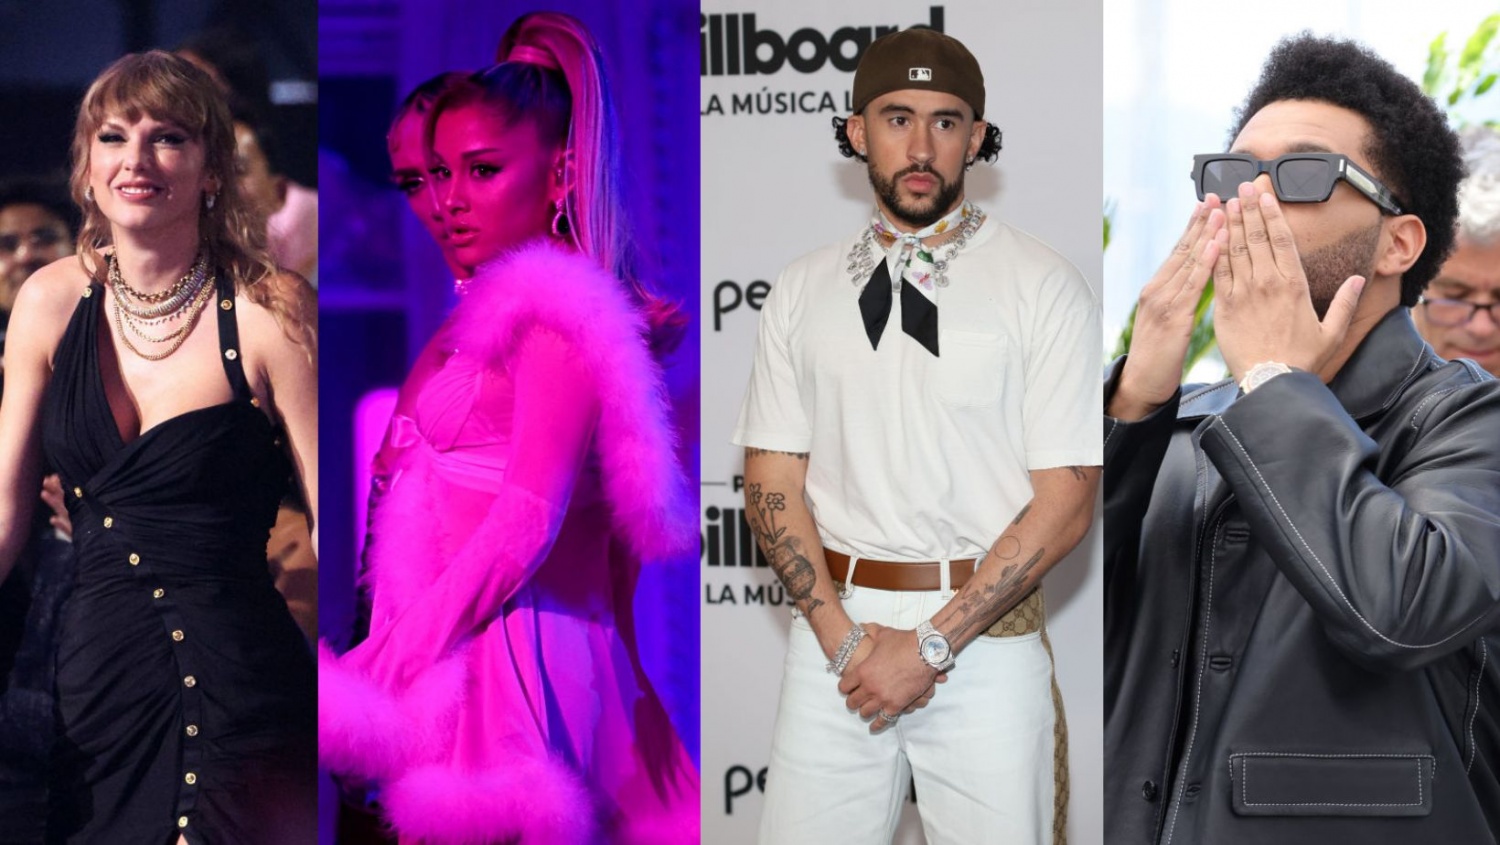 Taylor Swift, Ariana Grande, The Weeknd, Bad Bunny Leaving TikTok? Why Universal Music Group Threatens to Pull Out 